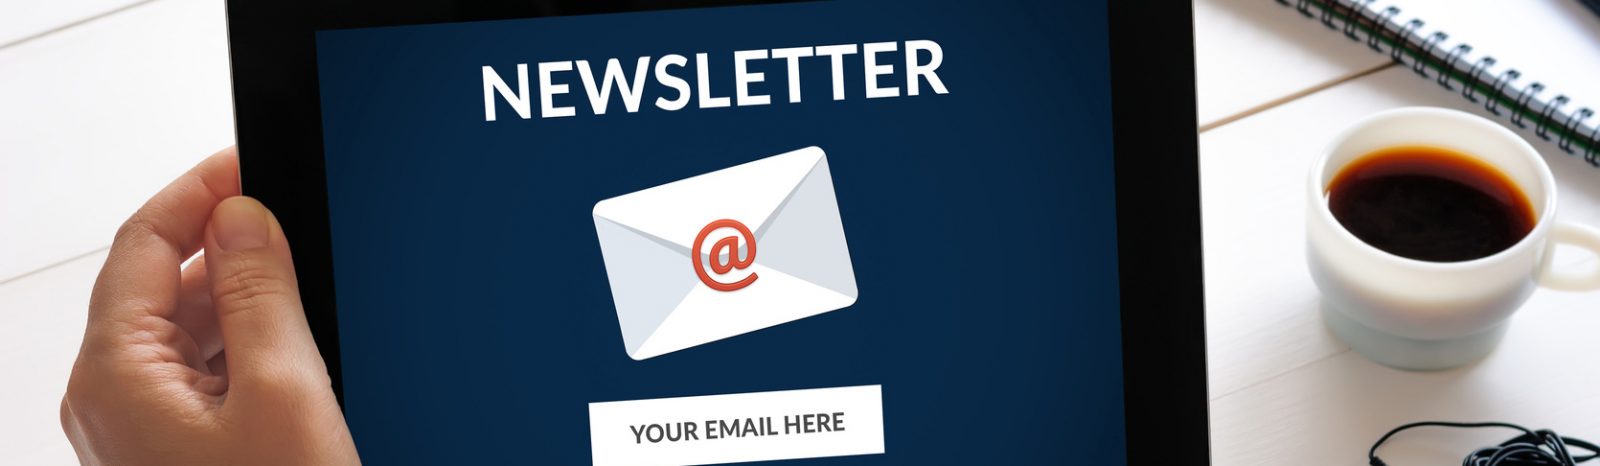 Newsletter and emails